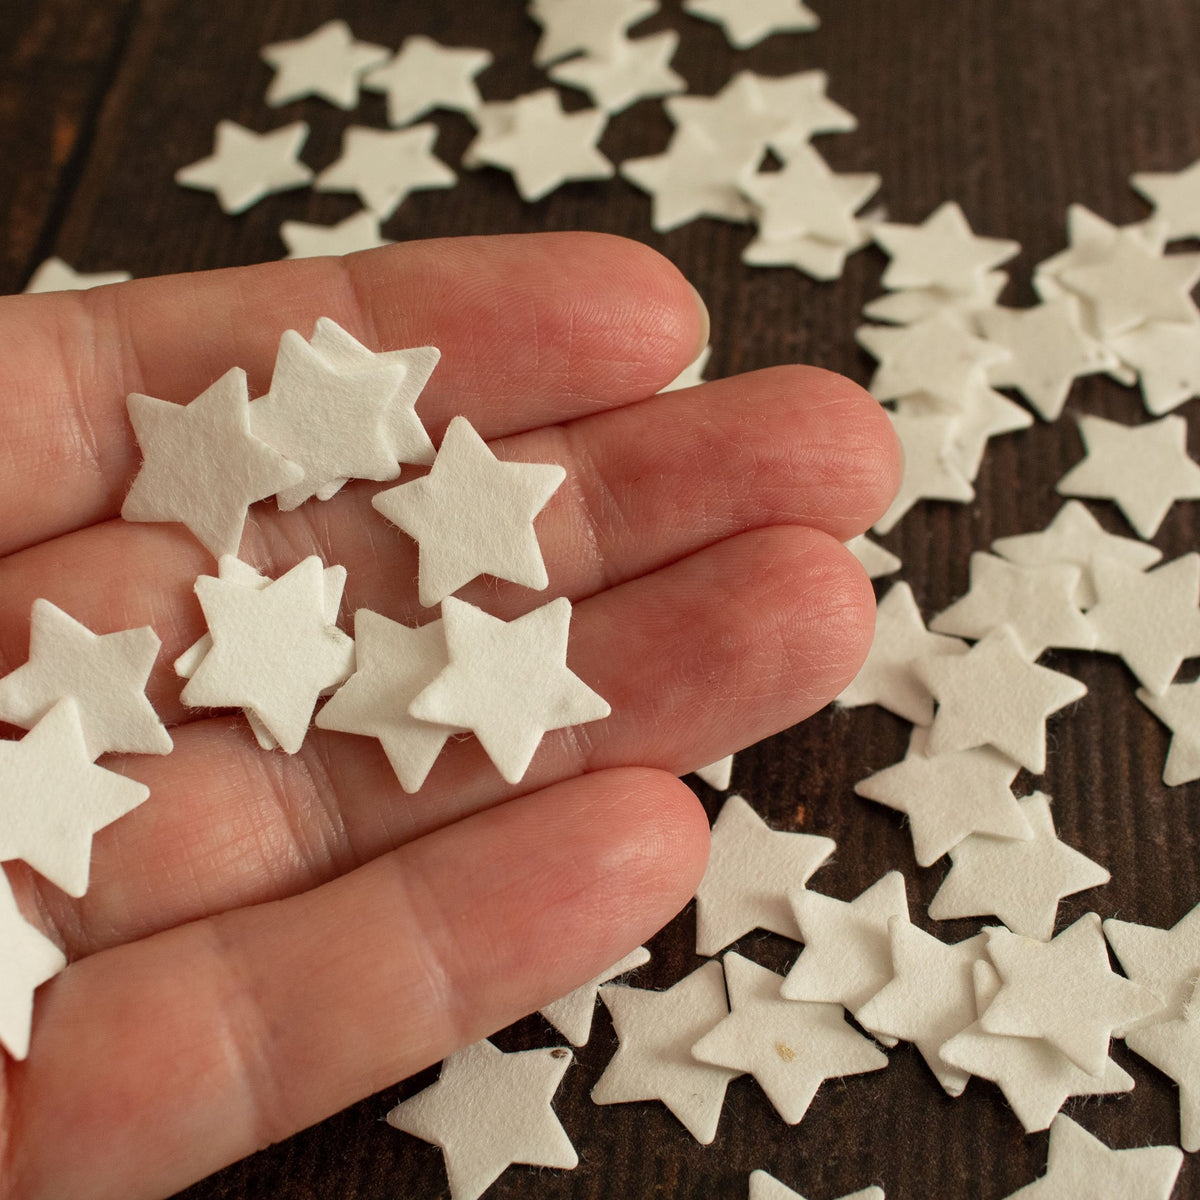 Christmas Star Confetti - Large Pack Of 100 Stars | Confetti - The Naughty Shrew